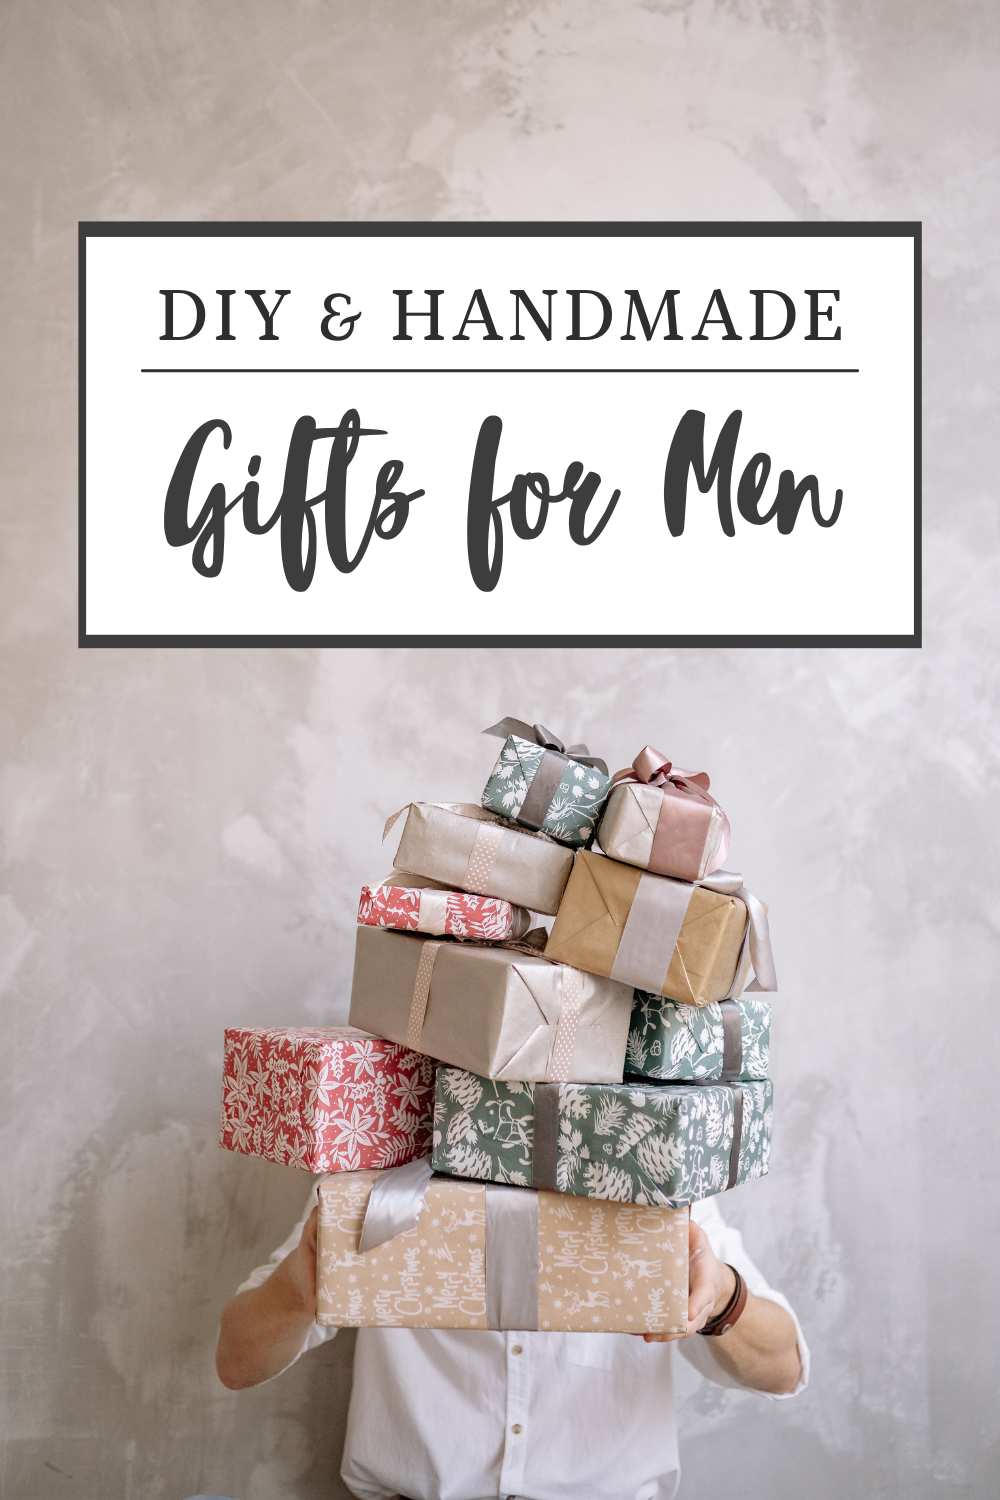 DIY Handmade gift ideas for the special ladies in your life